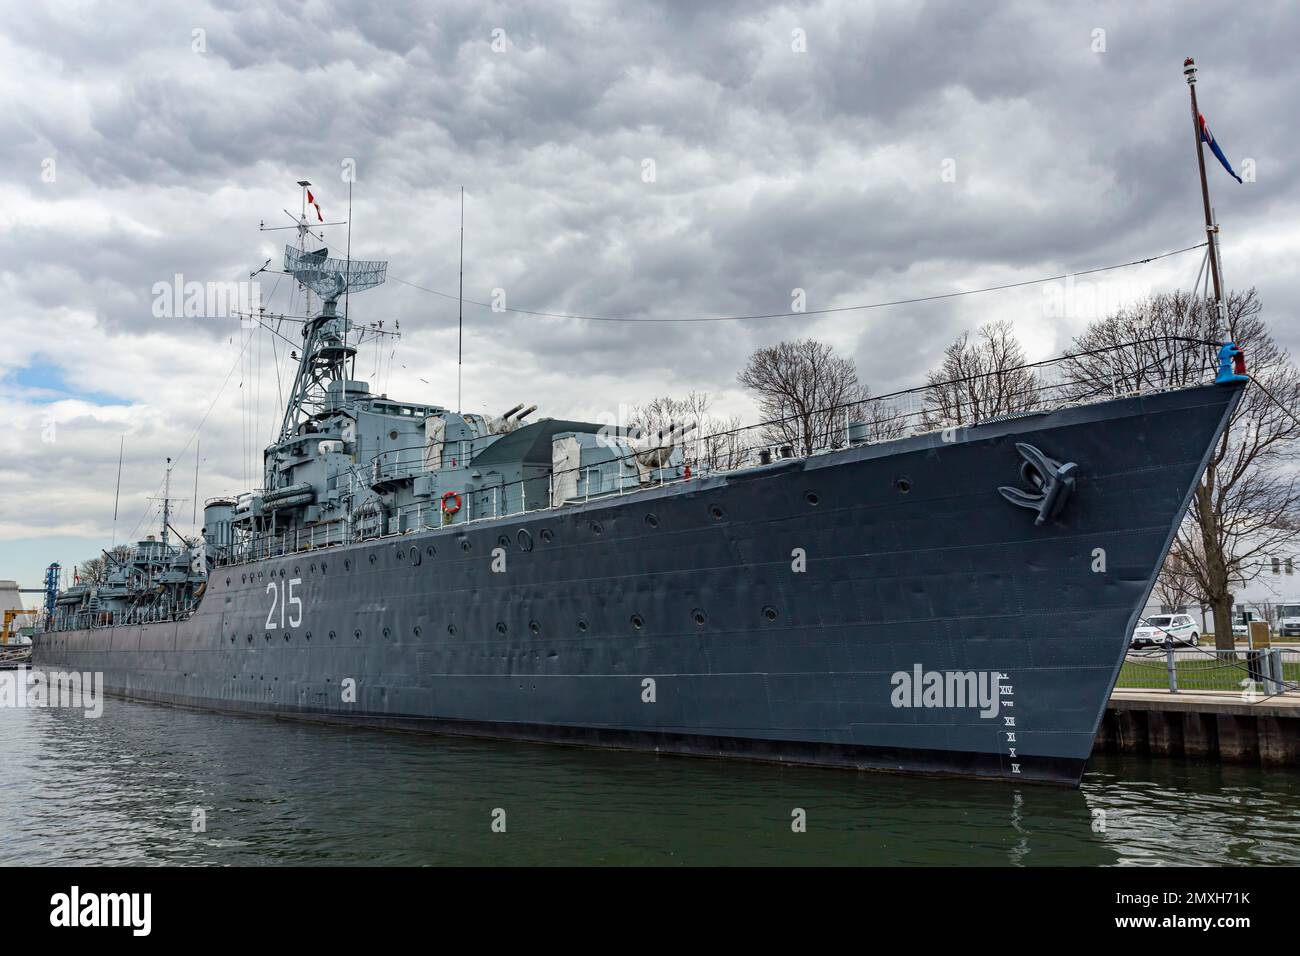 The legendary HMCS Haida, a Tribal-class destroyer, is Canada's most famous warship.  It served in WW II, the Korean War, and the Cold War.  Now a mus Stock Photo